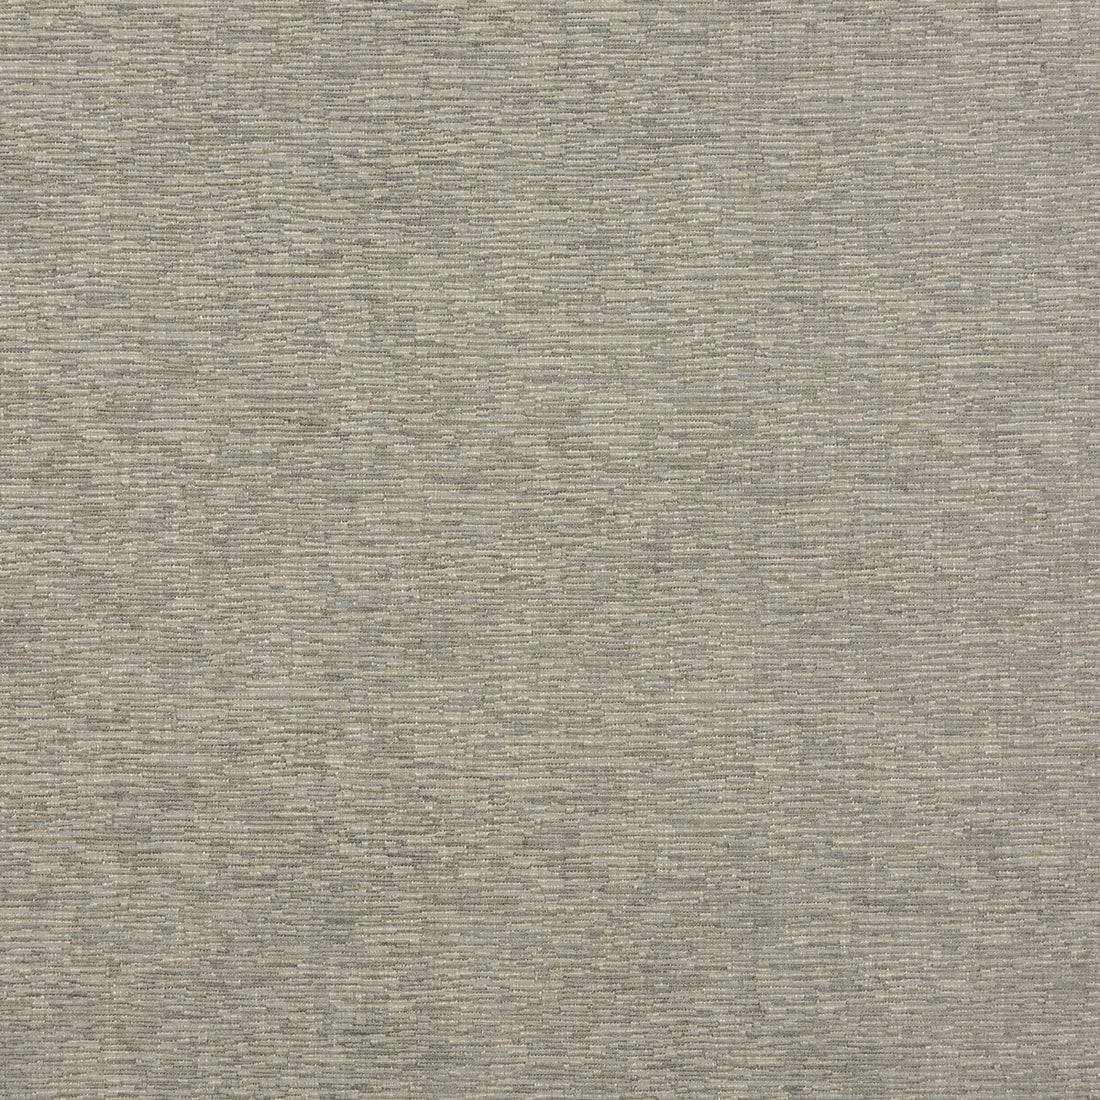 Tides fabric in dove grey color - pattern BF10683.910.0 - by G P &amp; J Baker in the Essential Colours collection